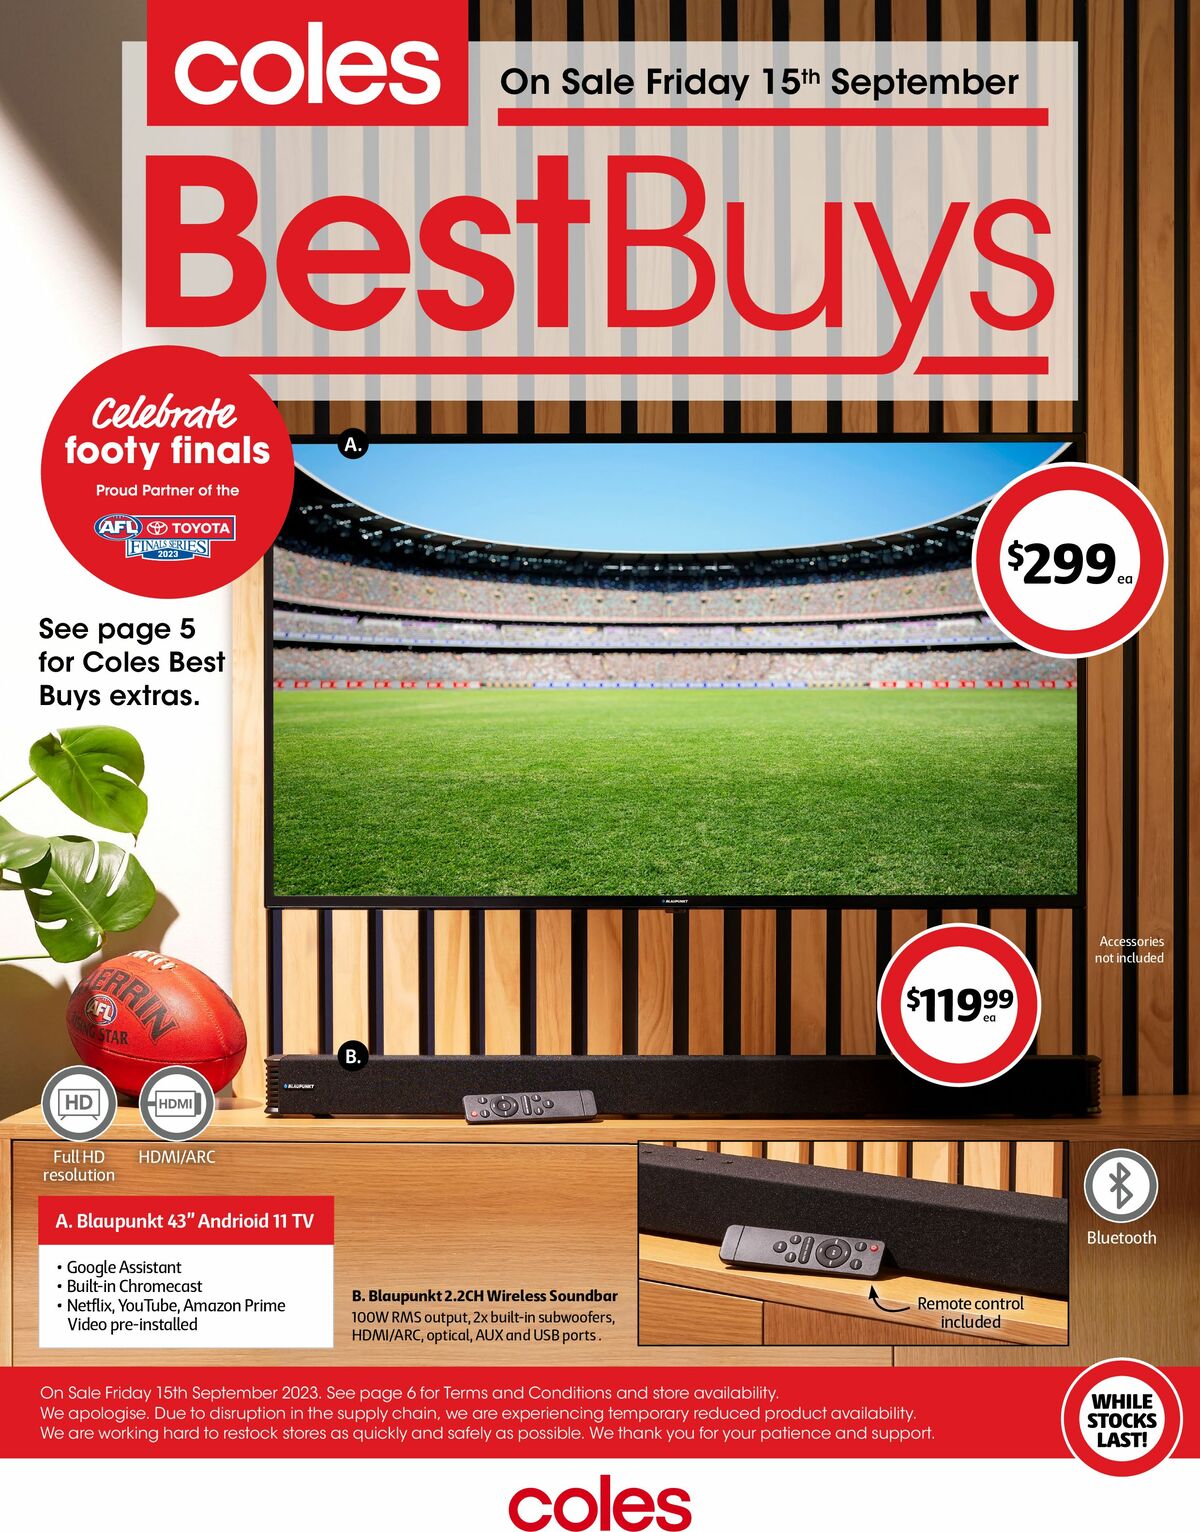 Coles Best Buys - Celebrate Footy Finals Catalogues from 15 September